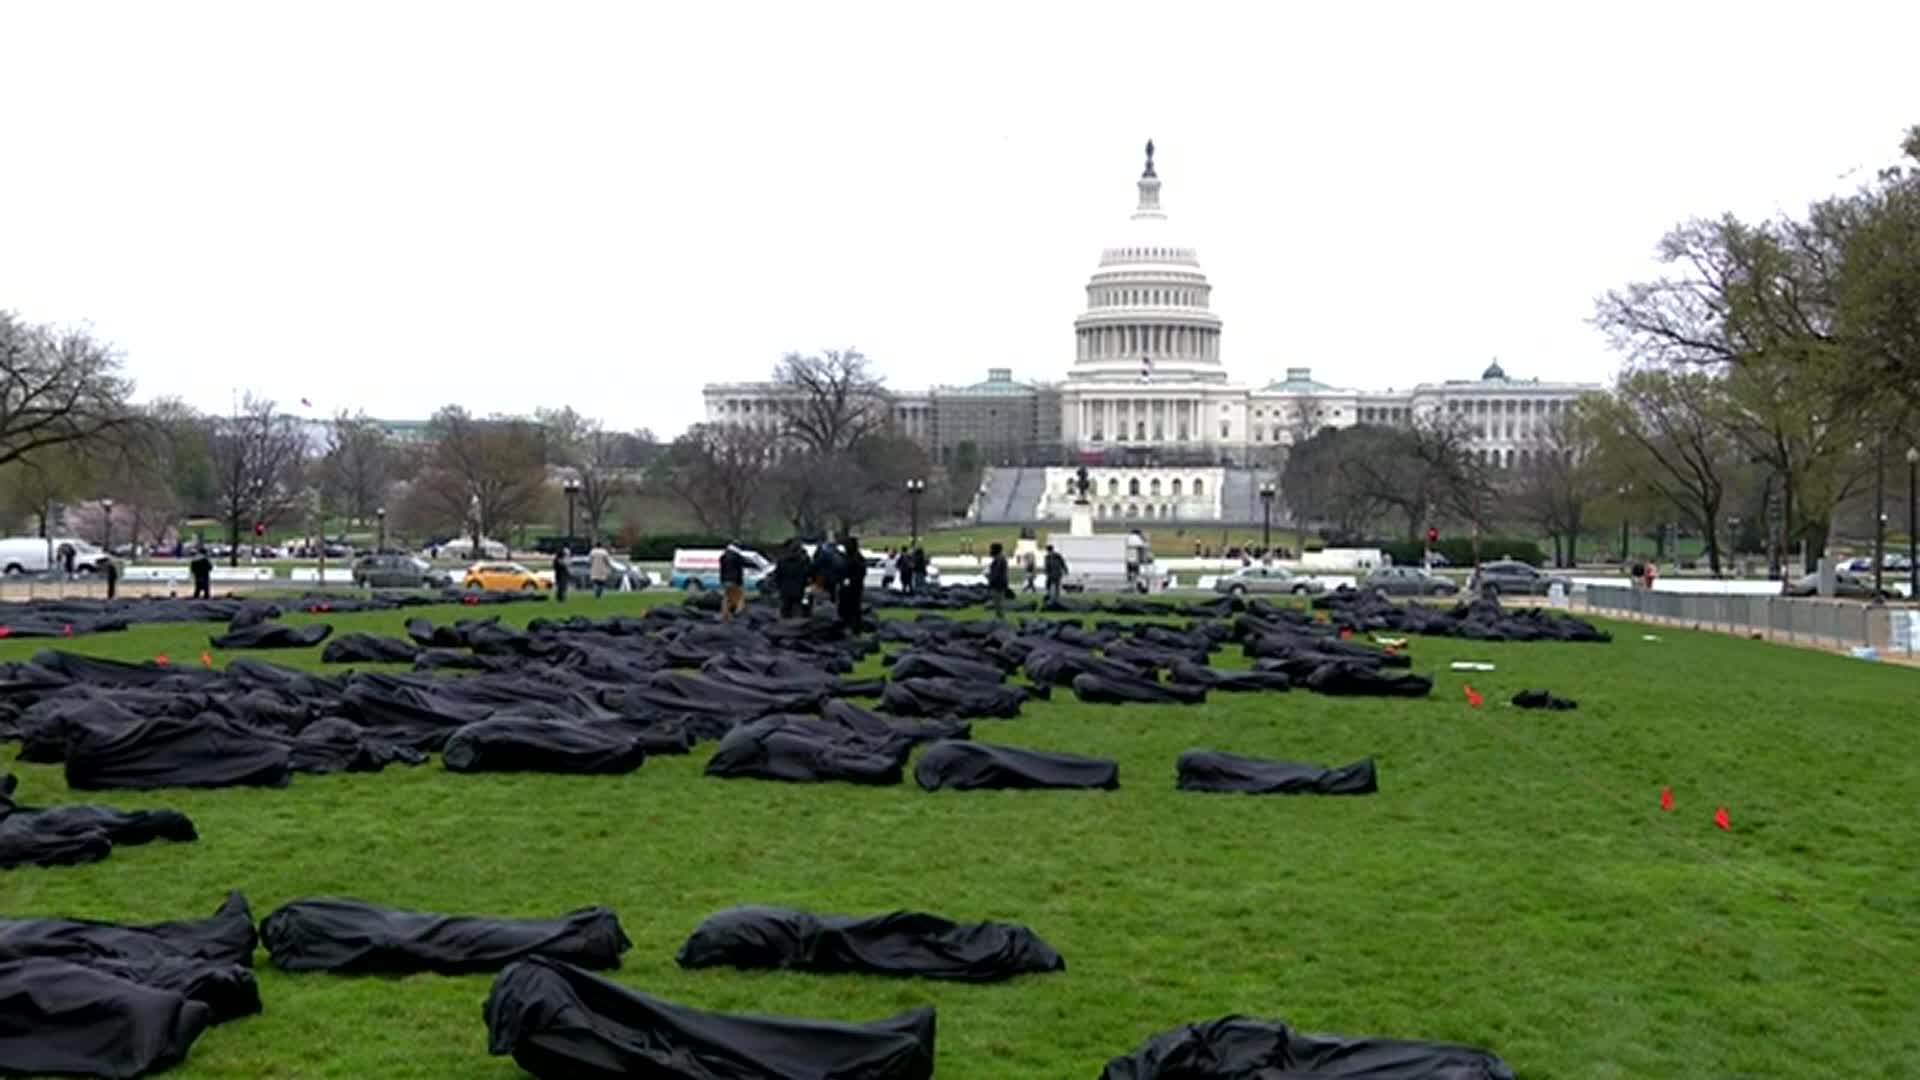 Activists Use Body Bags To Demand Change On 4 Year Annivesary Of ‘March For Our Lives’ Rally